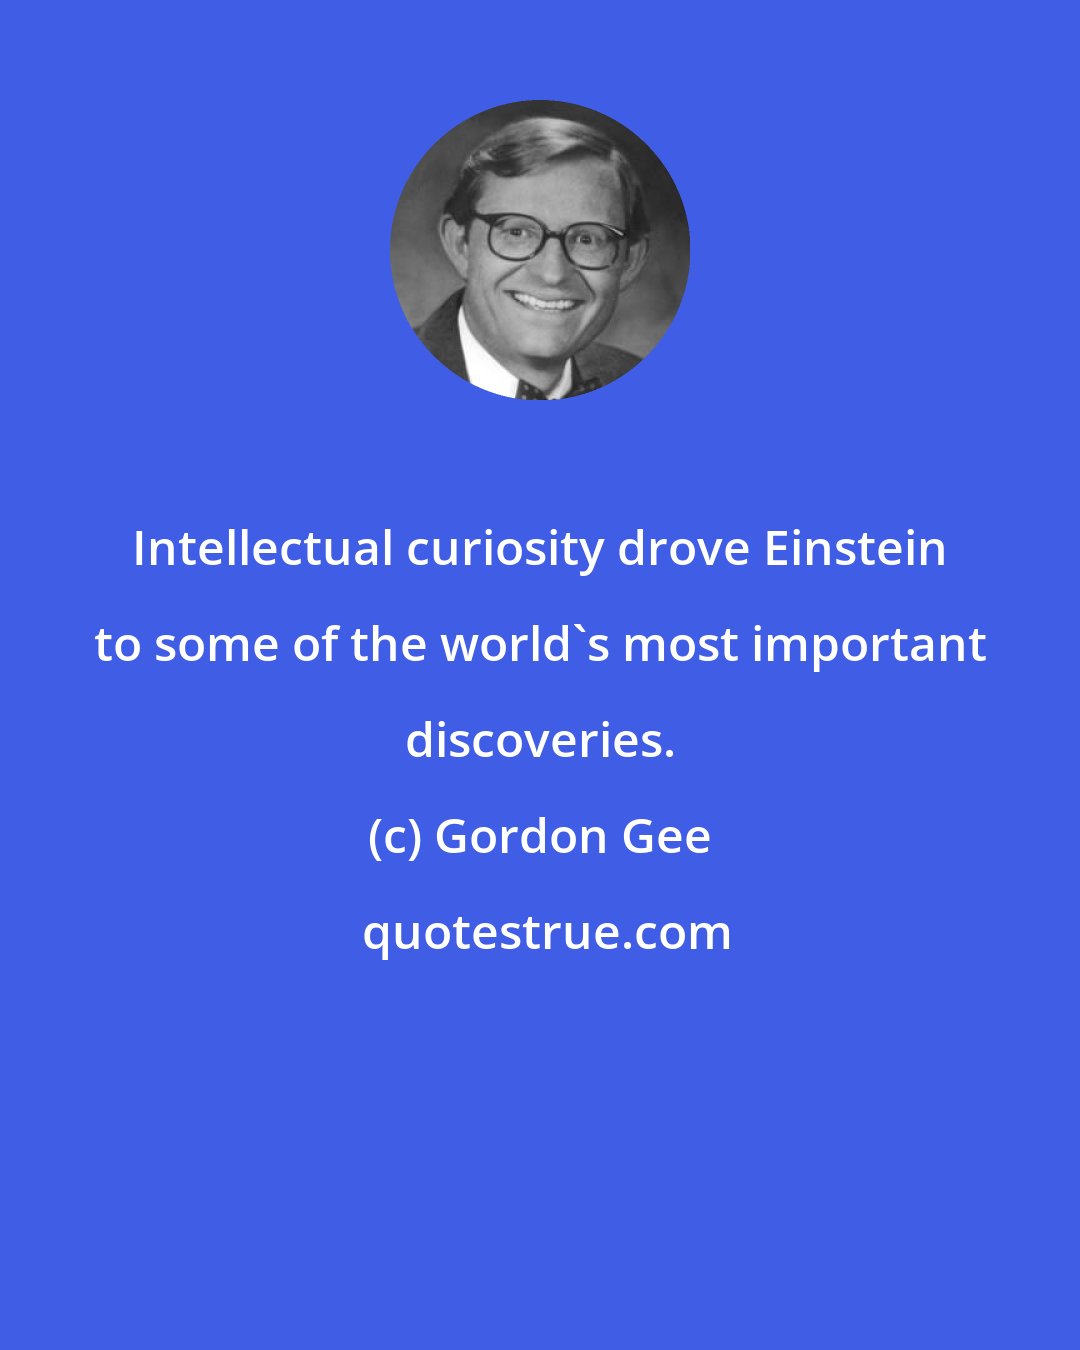 Gordon Gee: Intellectual curiosity drove Einstein to some of the world's most important discoveries.